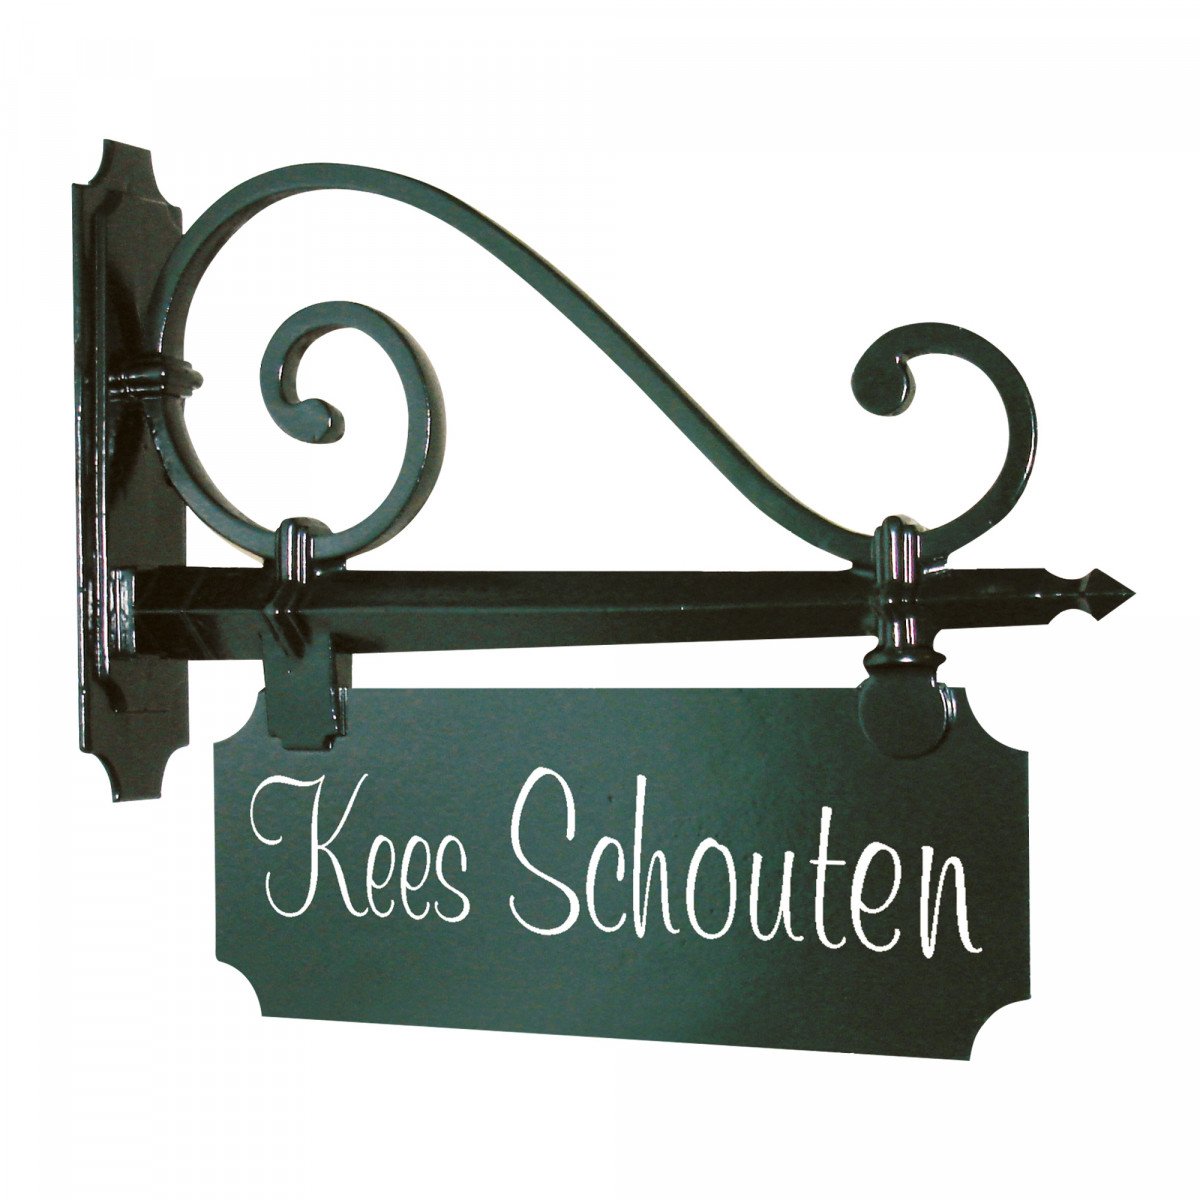 Handmade classic hanging sign from KS outdoor lighting company